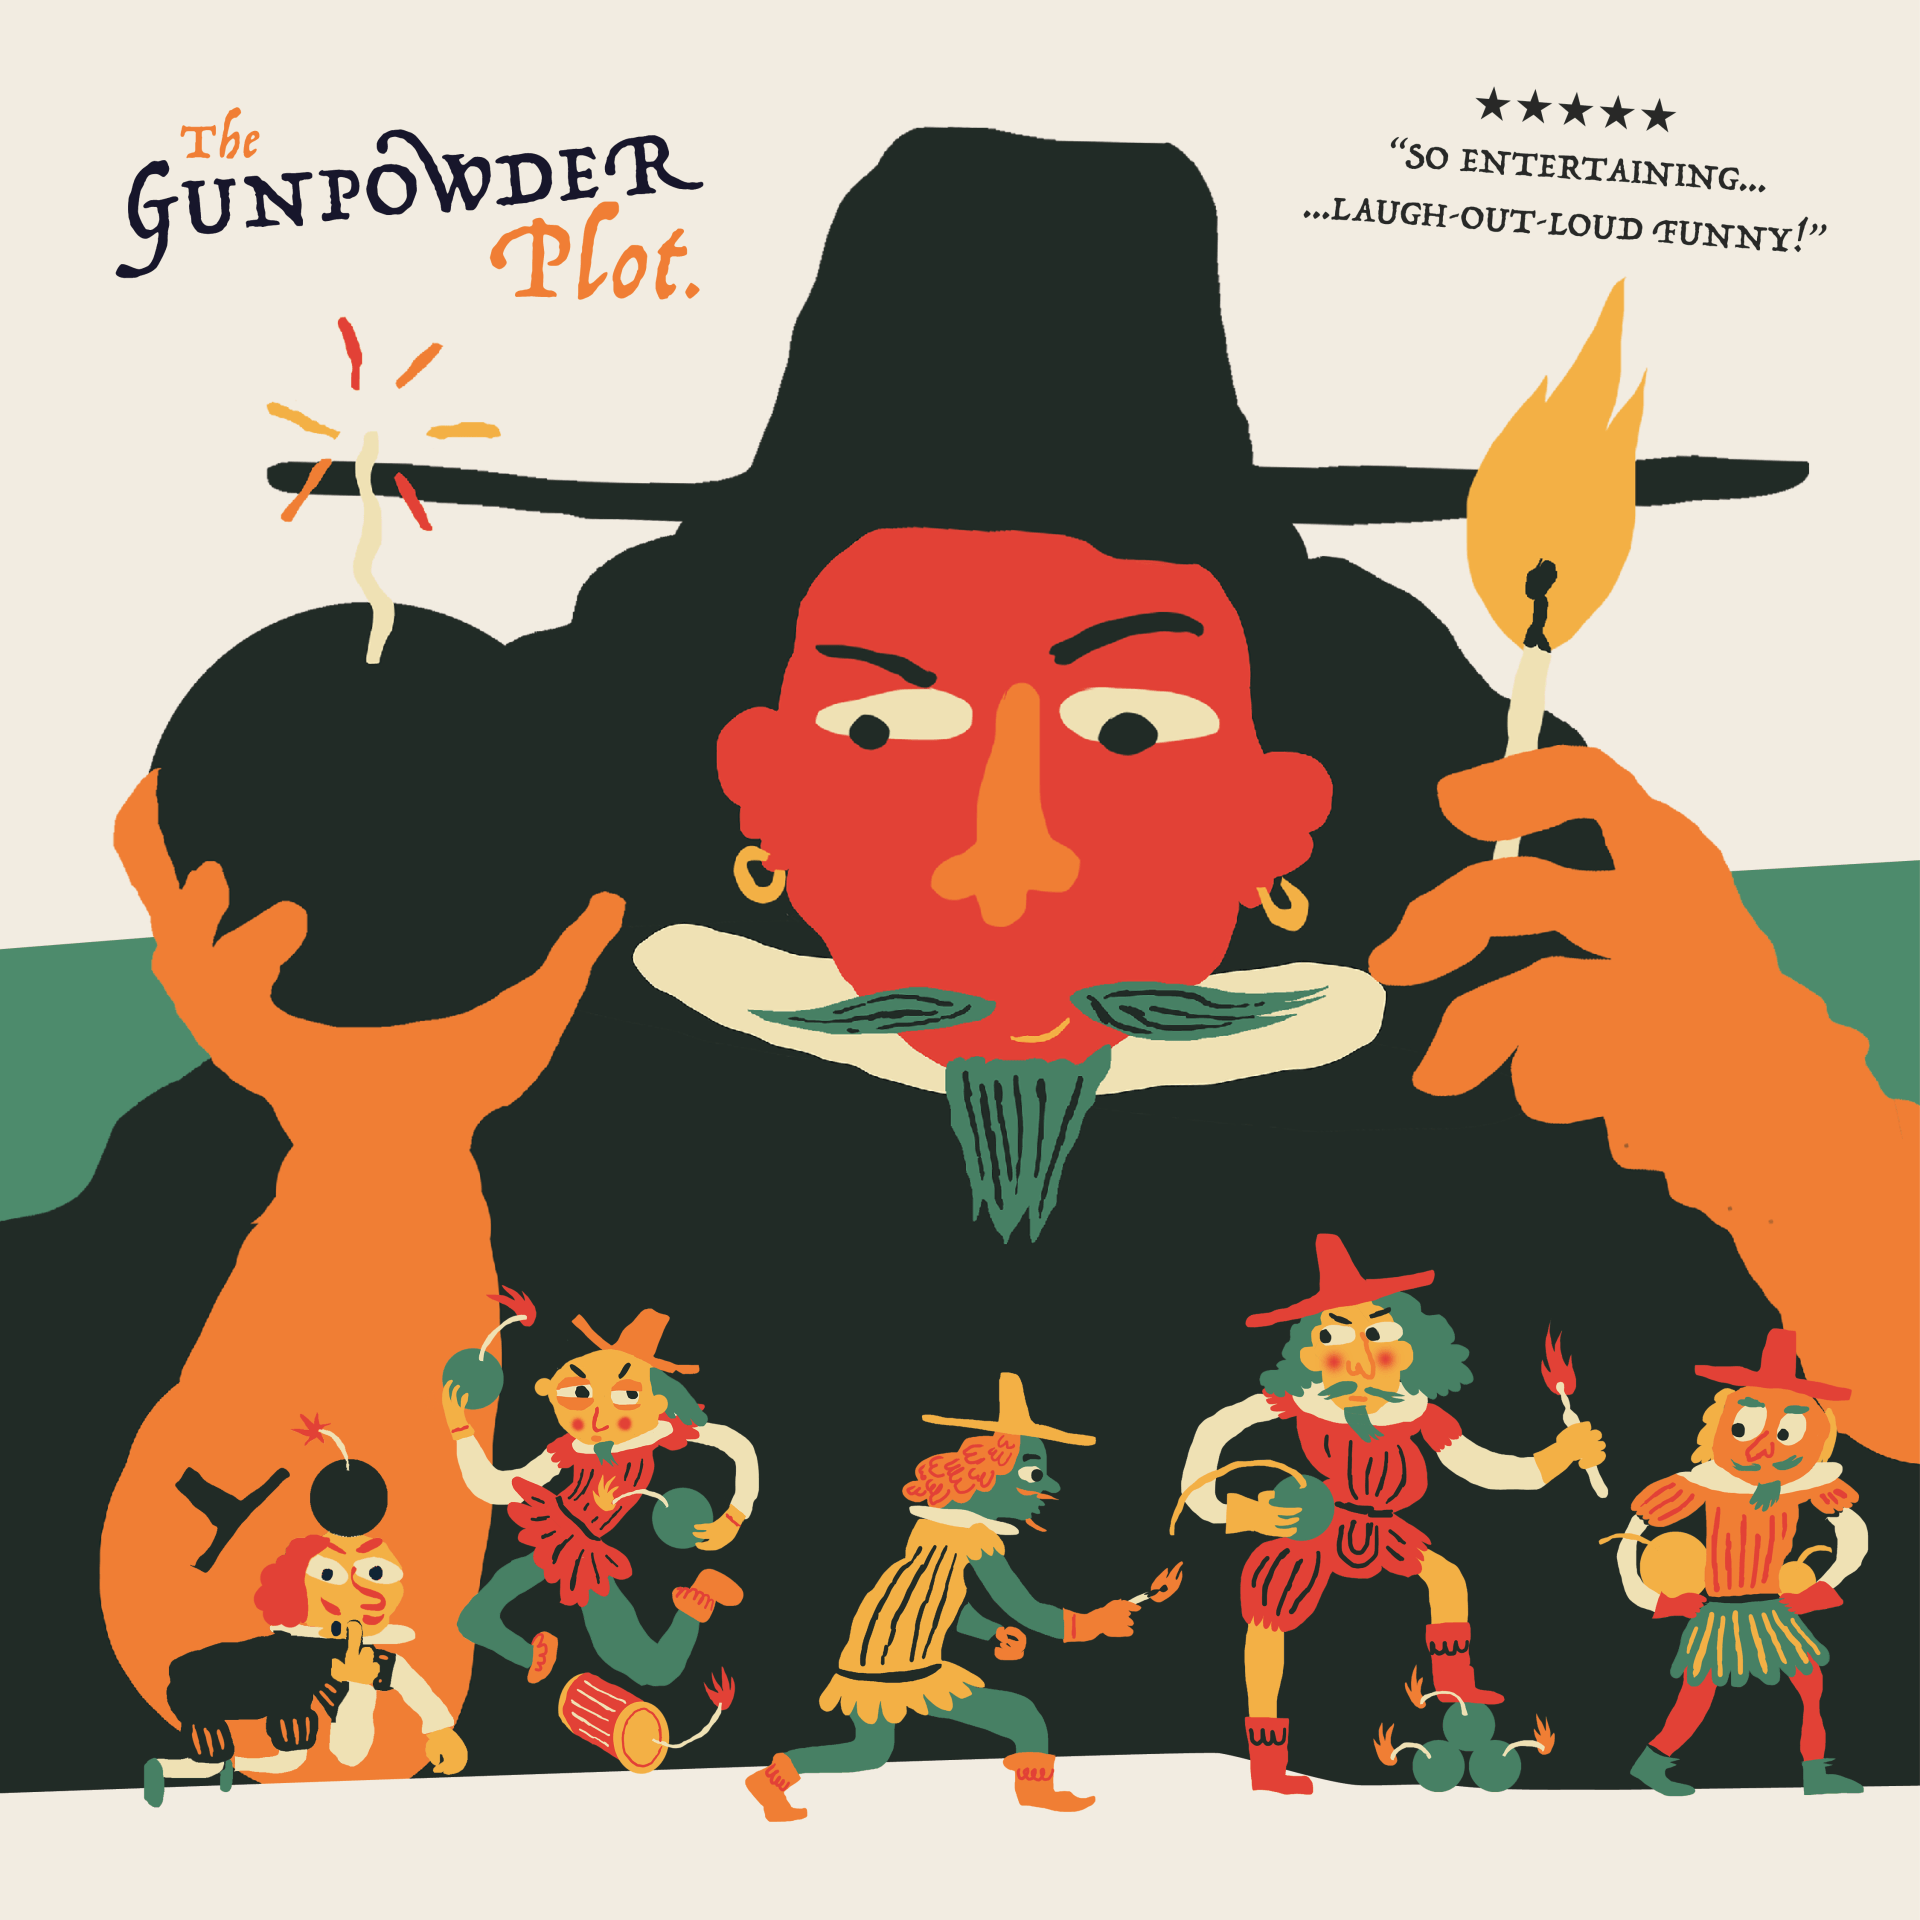 A poster for the gunpowder plot shows a man with a beard